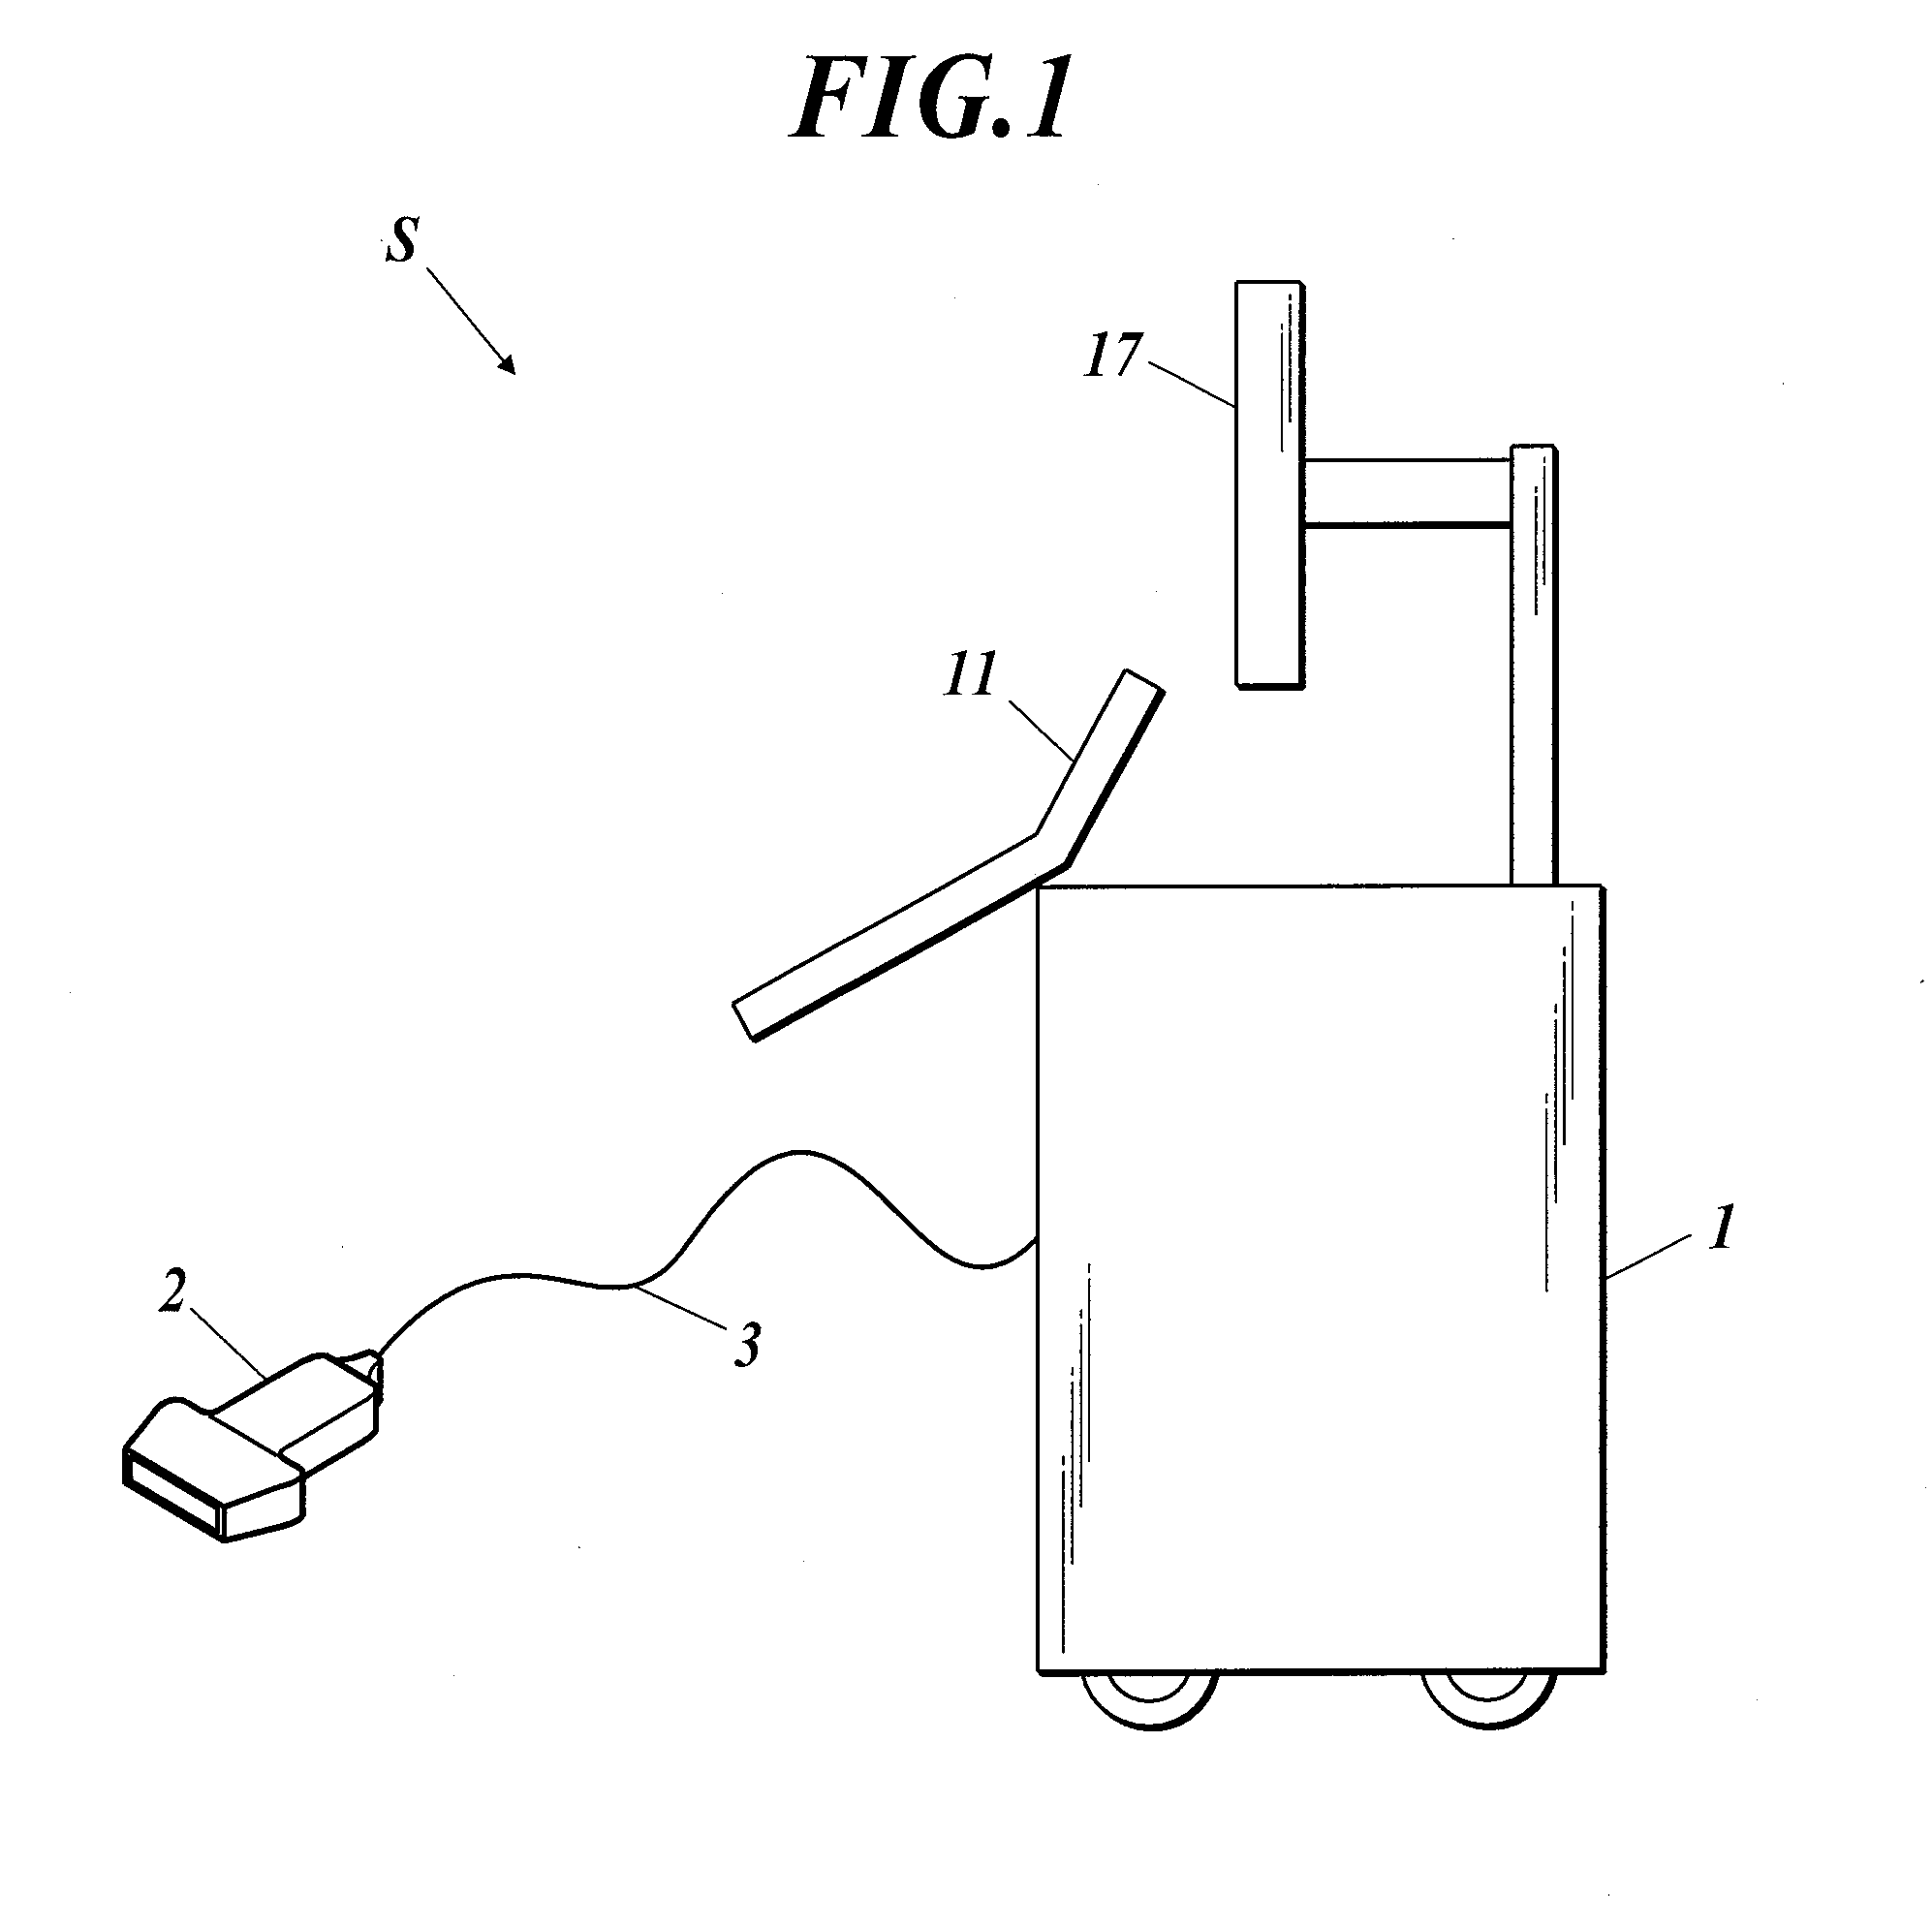 Ultrasound probe and ultrasound diagnostic imaging apparatus